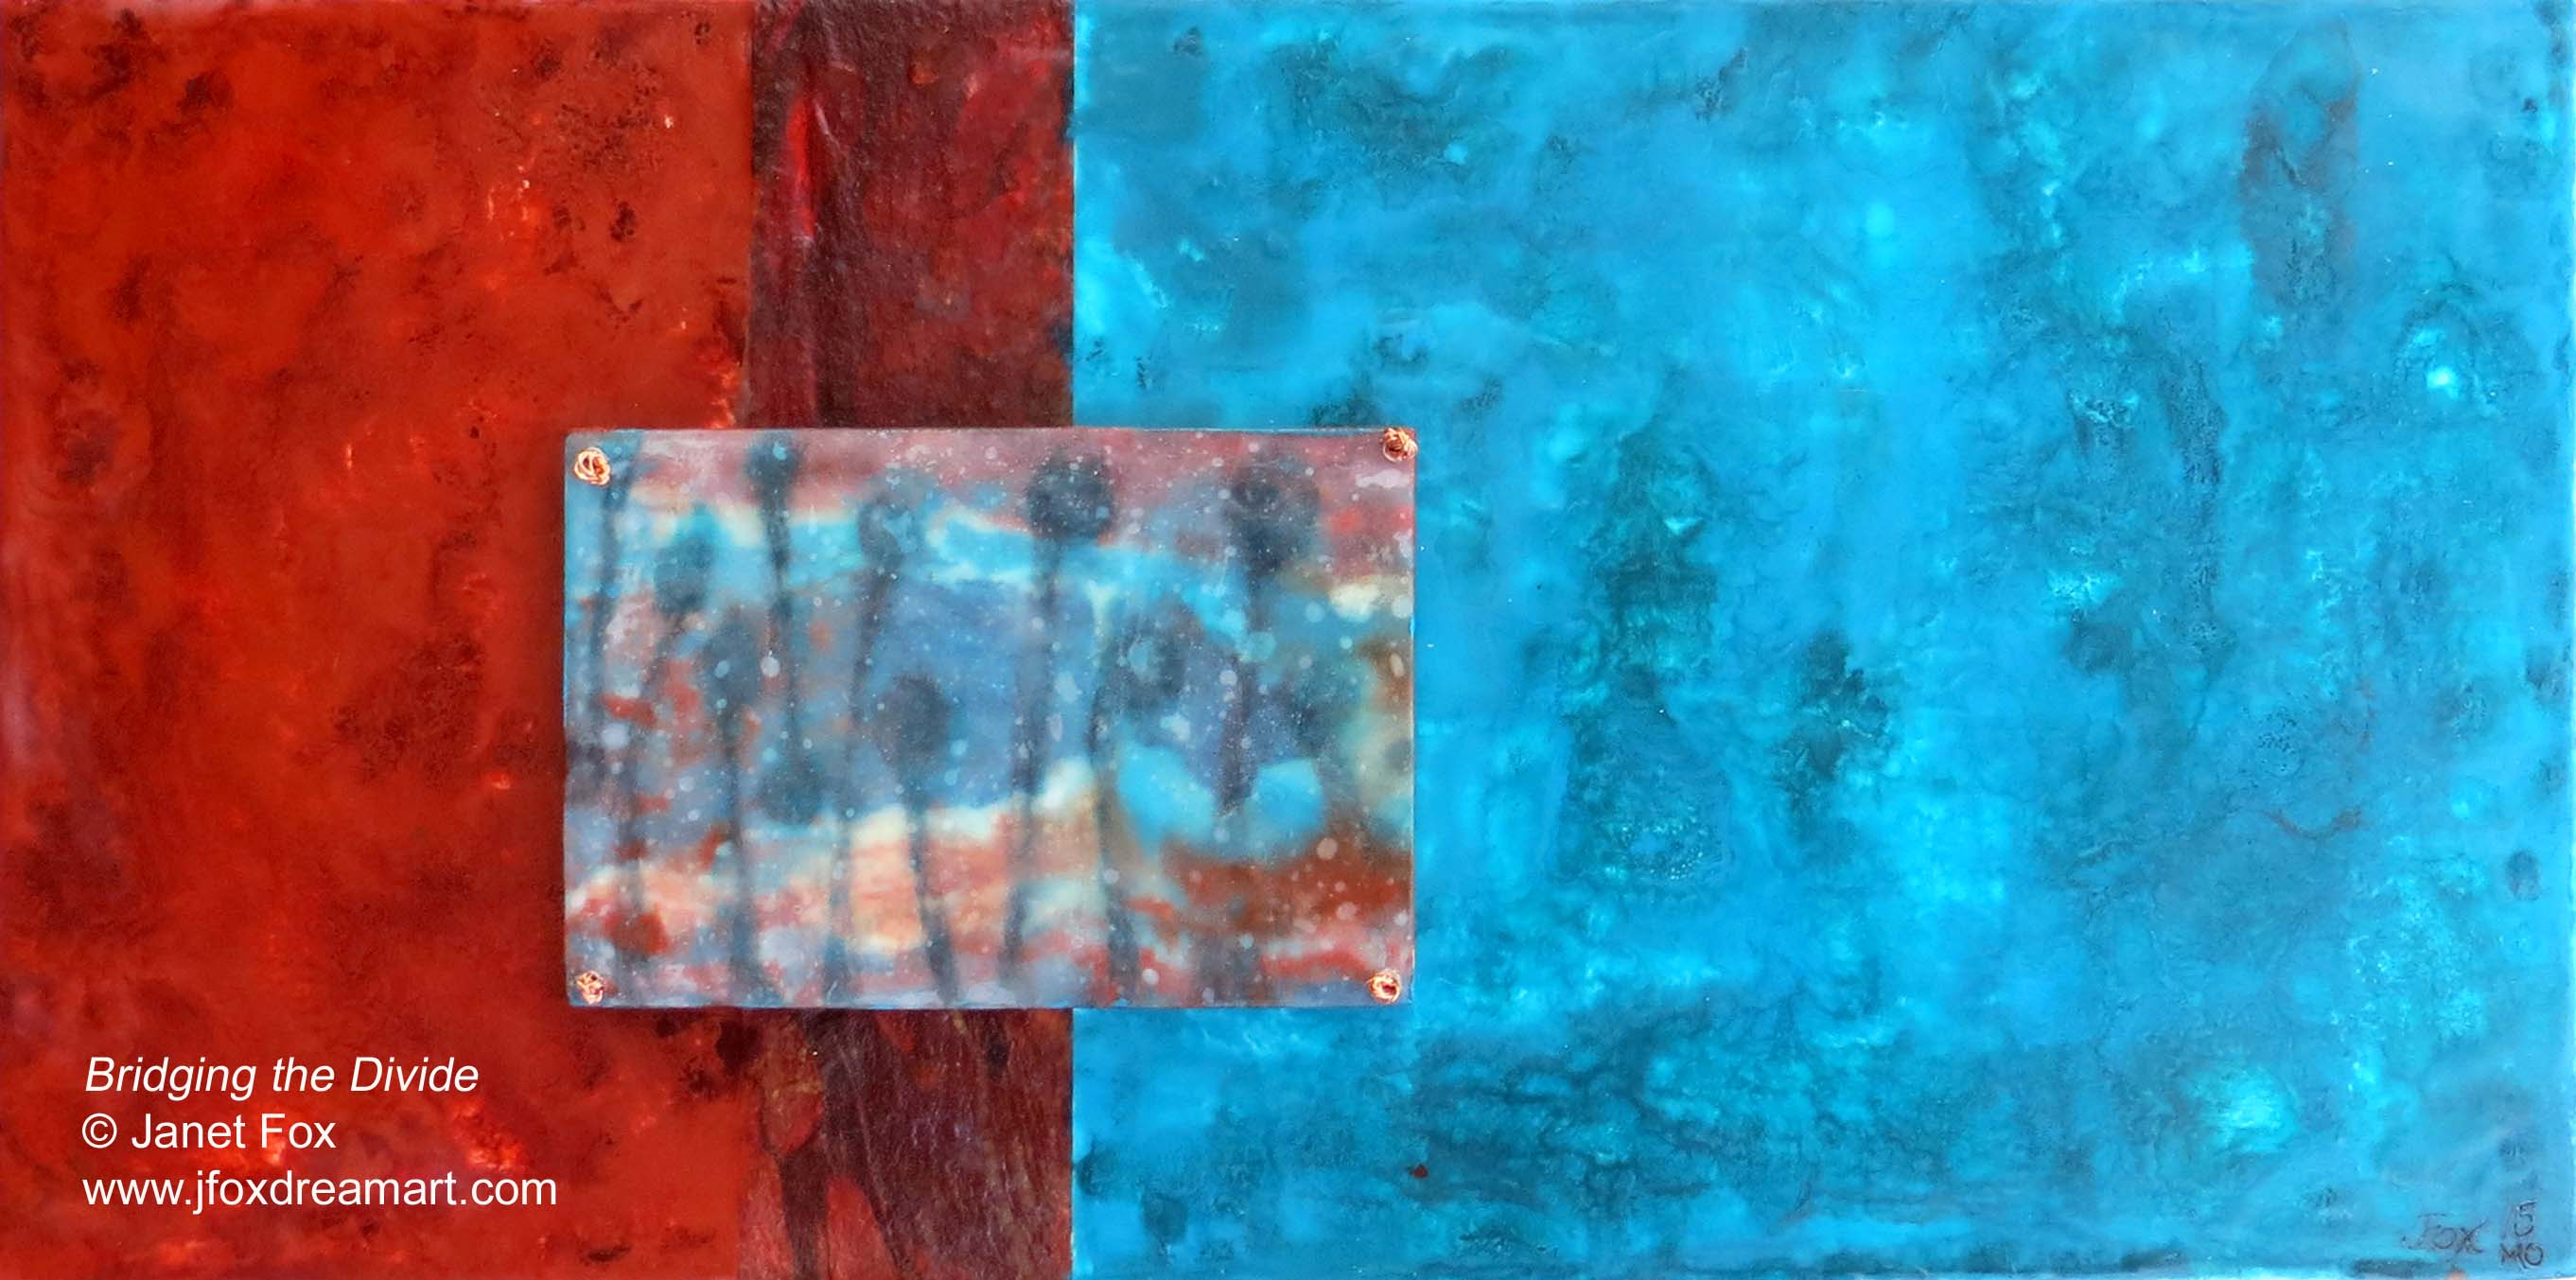 Image of an encaustic painting by Janet Fox titled "Bridging the Divide."